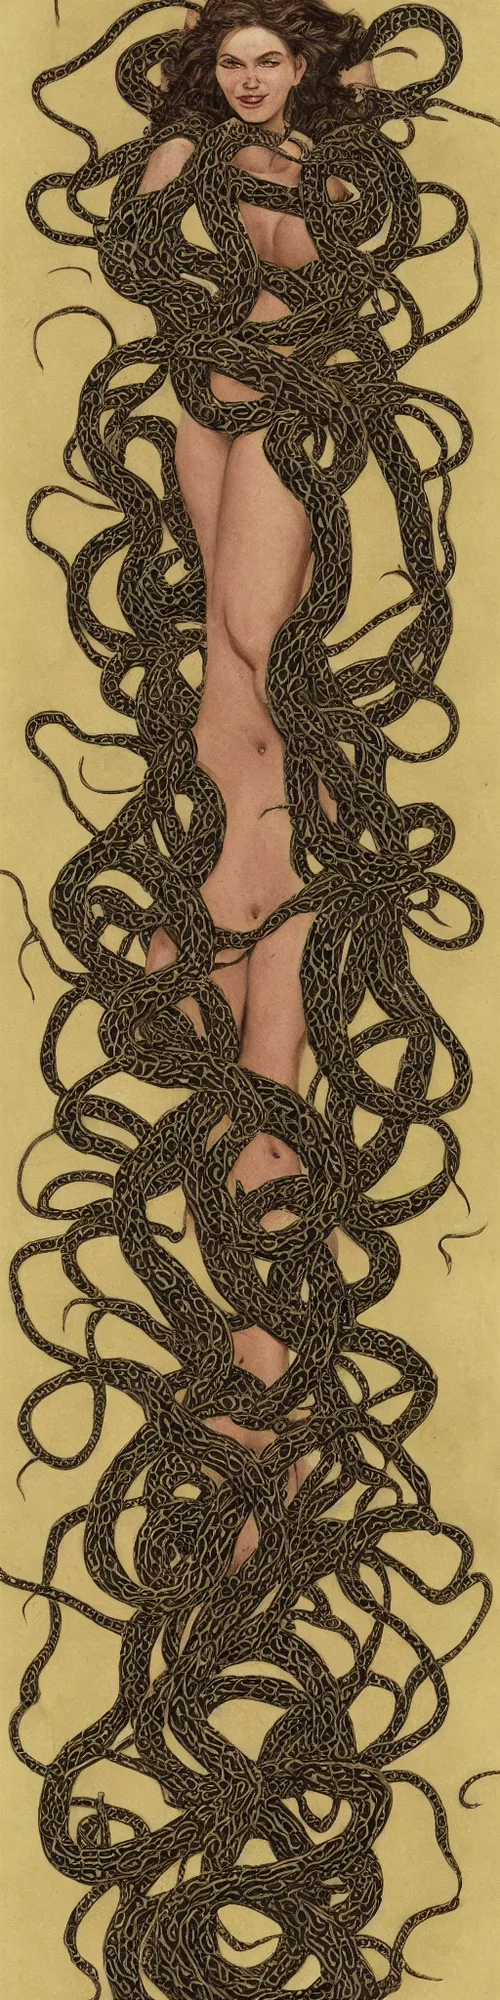 Prompt: full body portrait of a woman made of snakes, fantasy artwork